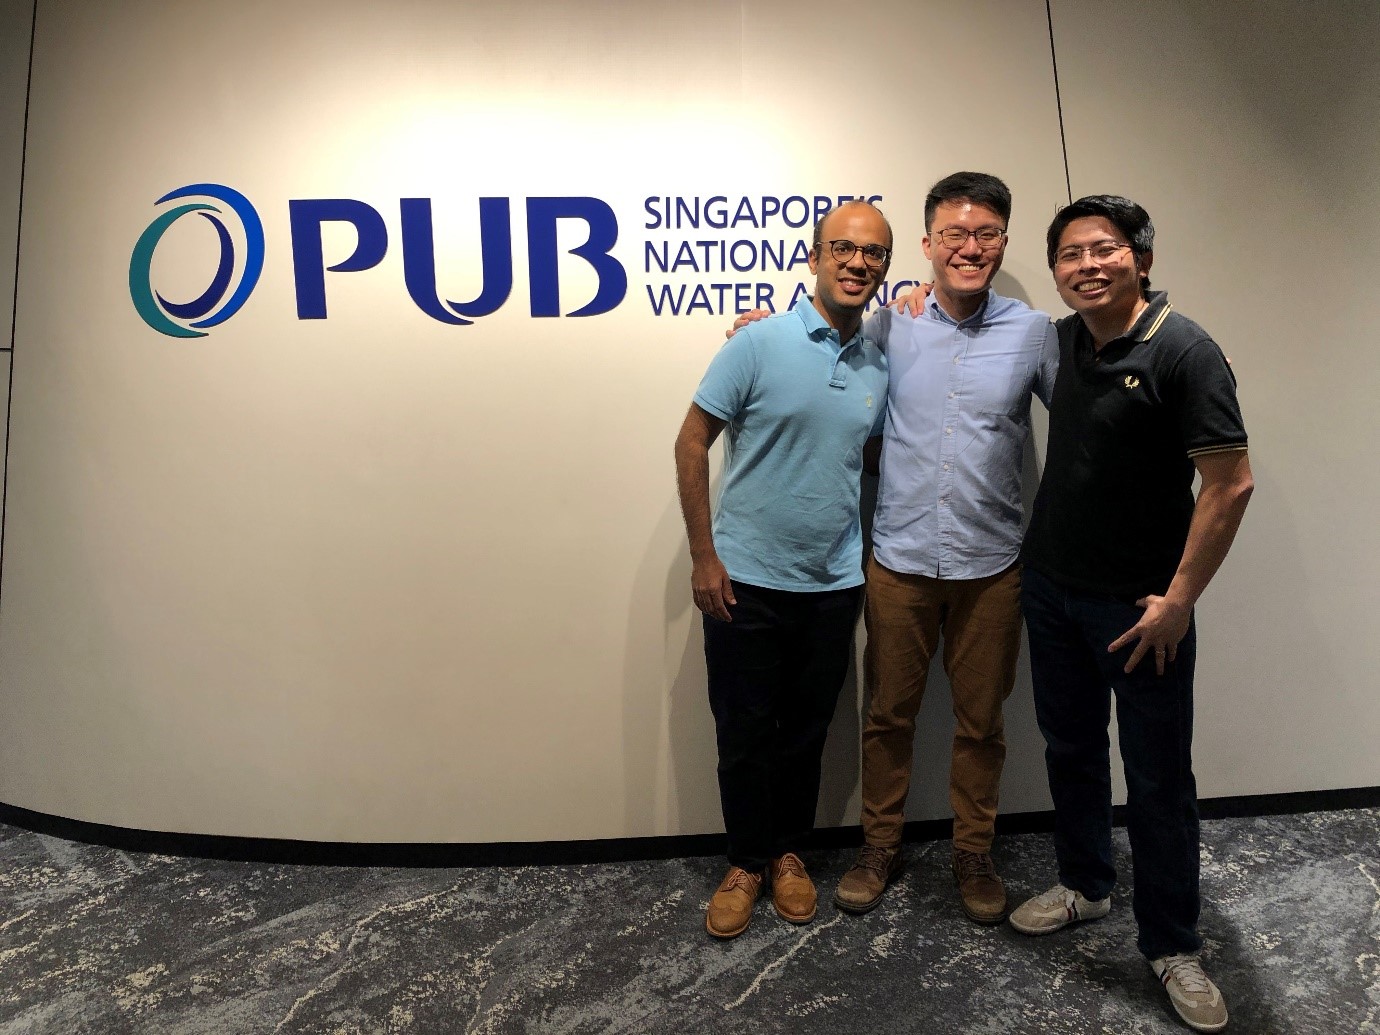 From source to sink: how data science helps Singapore manage its water resources